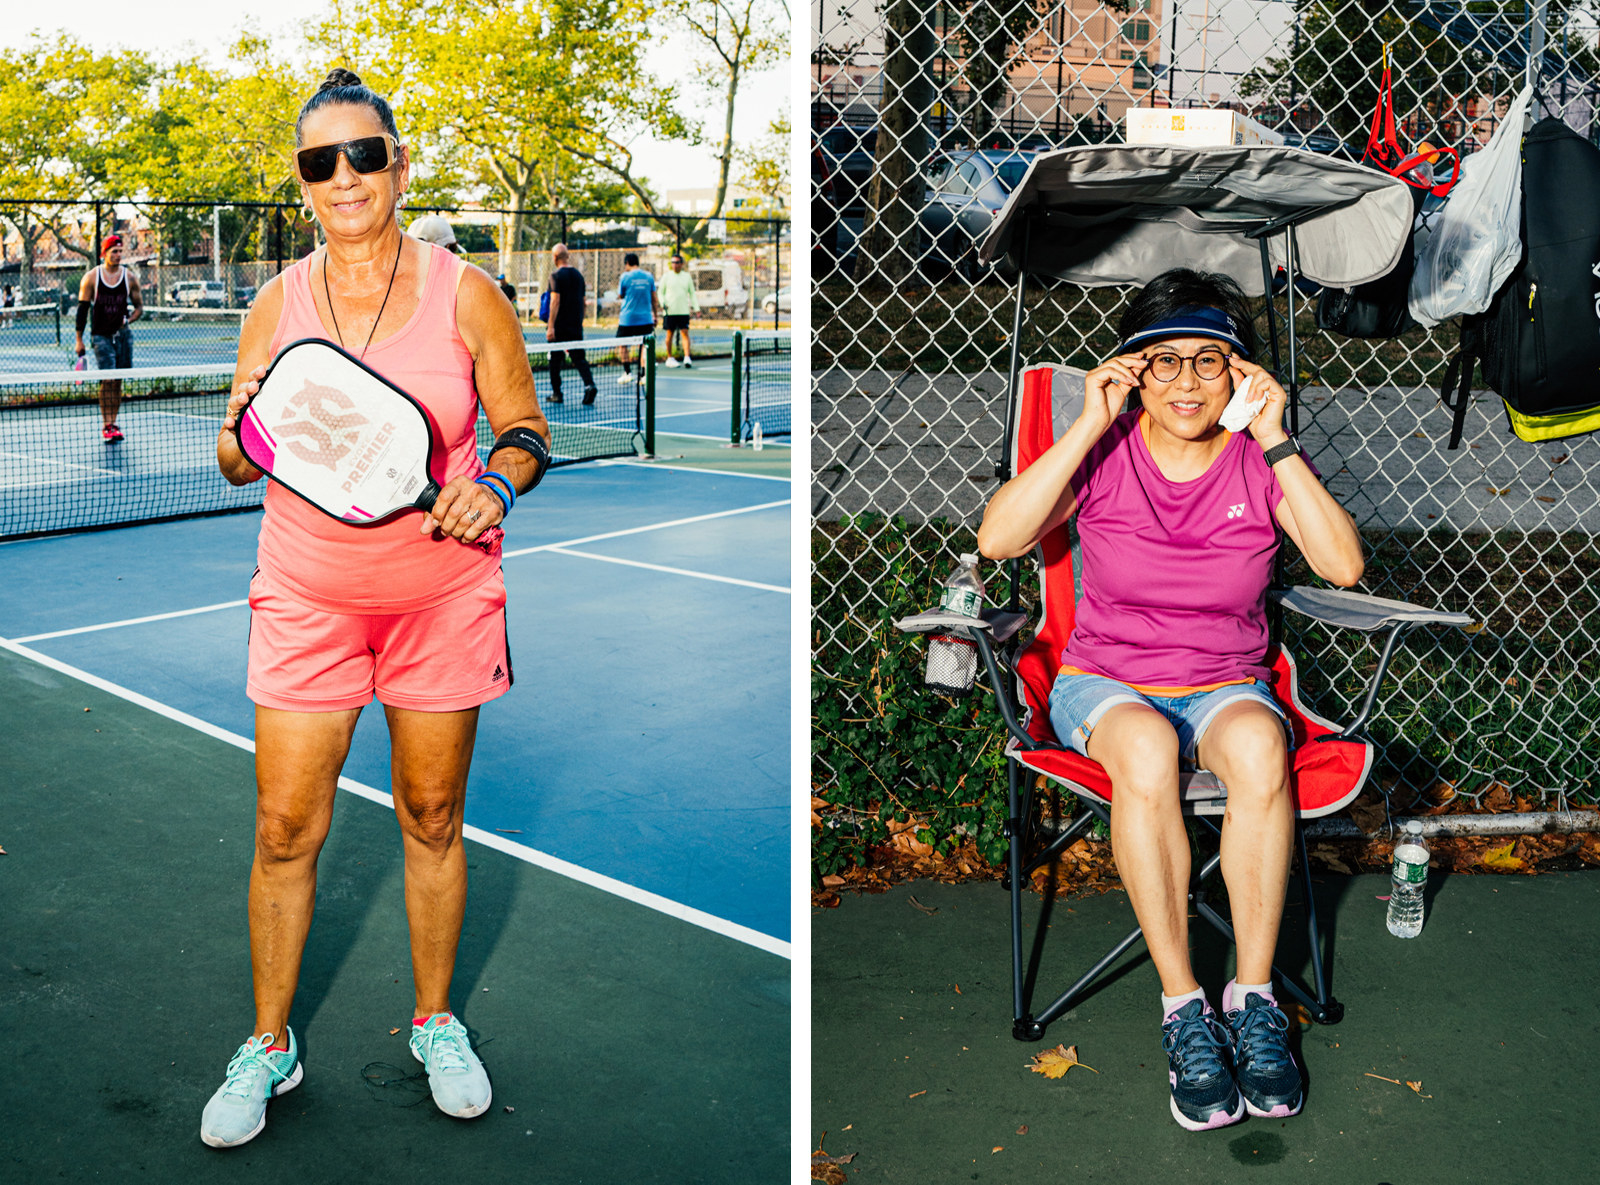 Rochelle Martinez (left): "Pickleball is very good for your mind, soci...